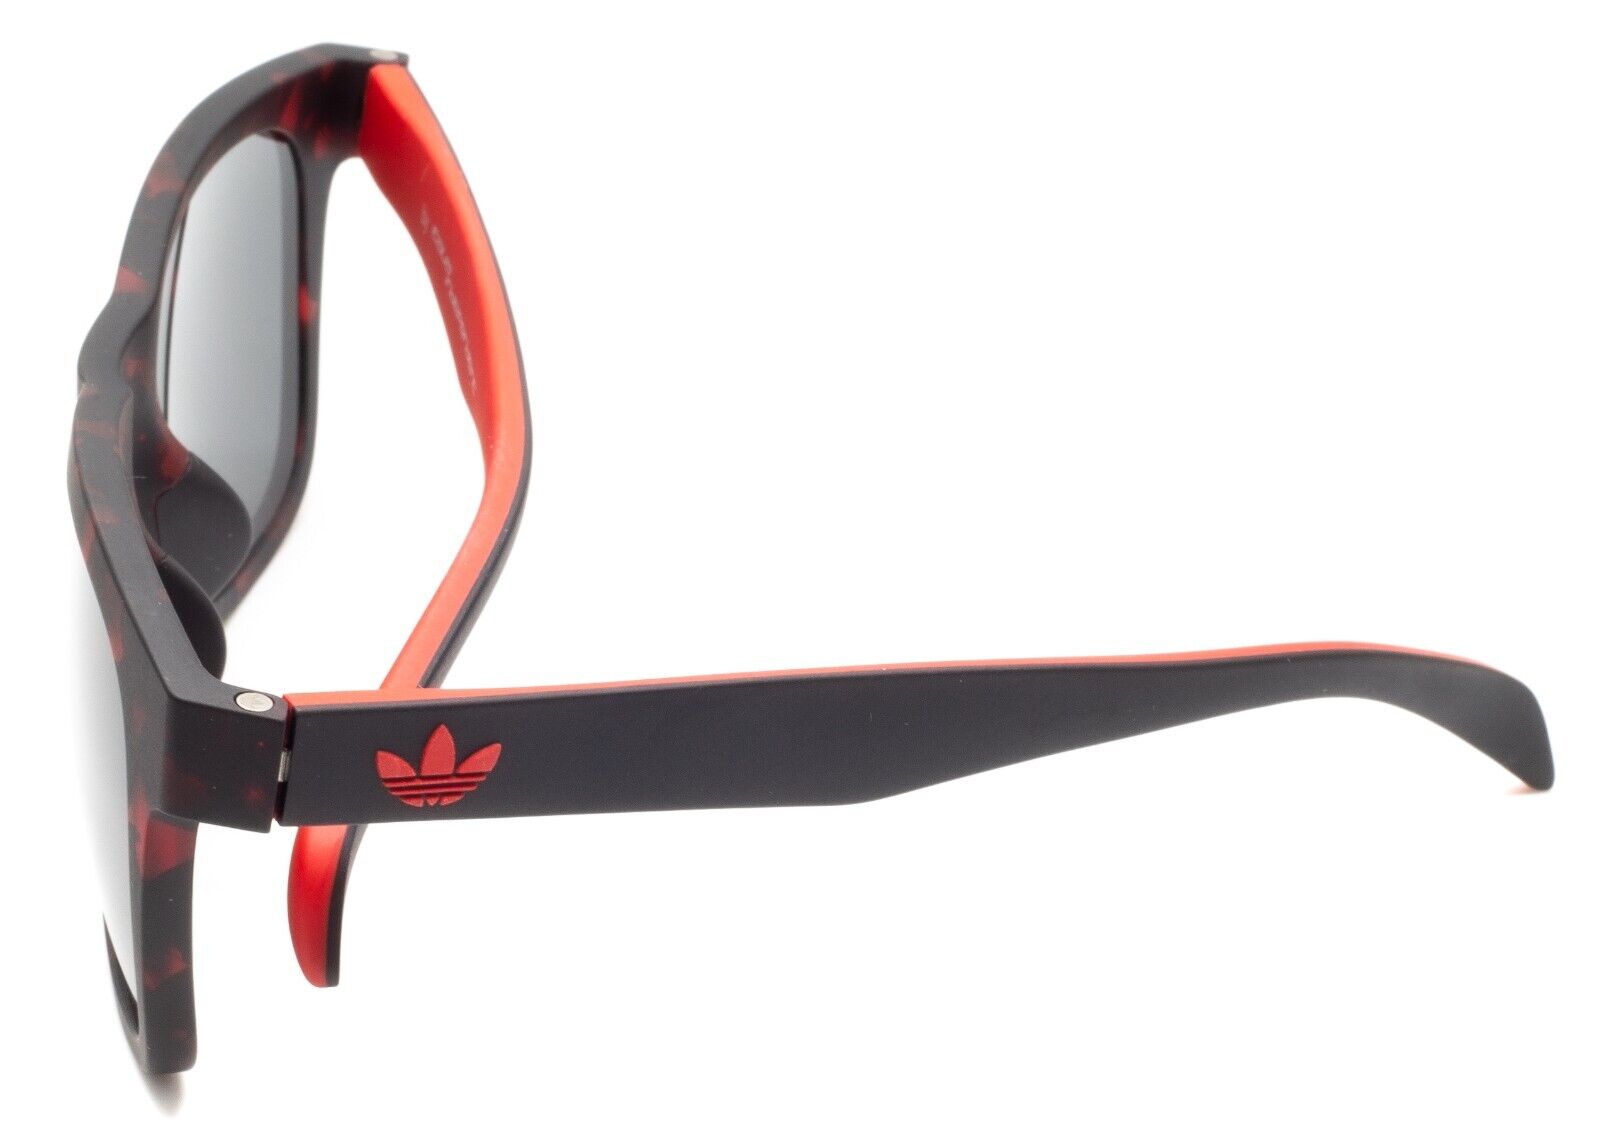 ADIDAS by ITALIA INDEPENDENT AOR004.142.009 Cat.3 52mm Sunglasses 